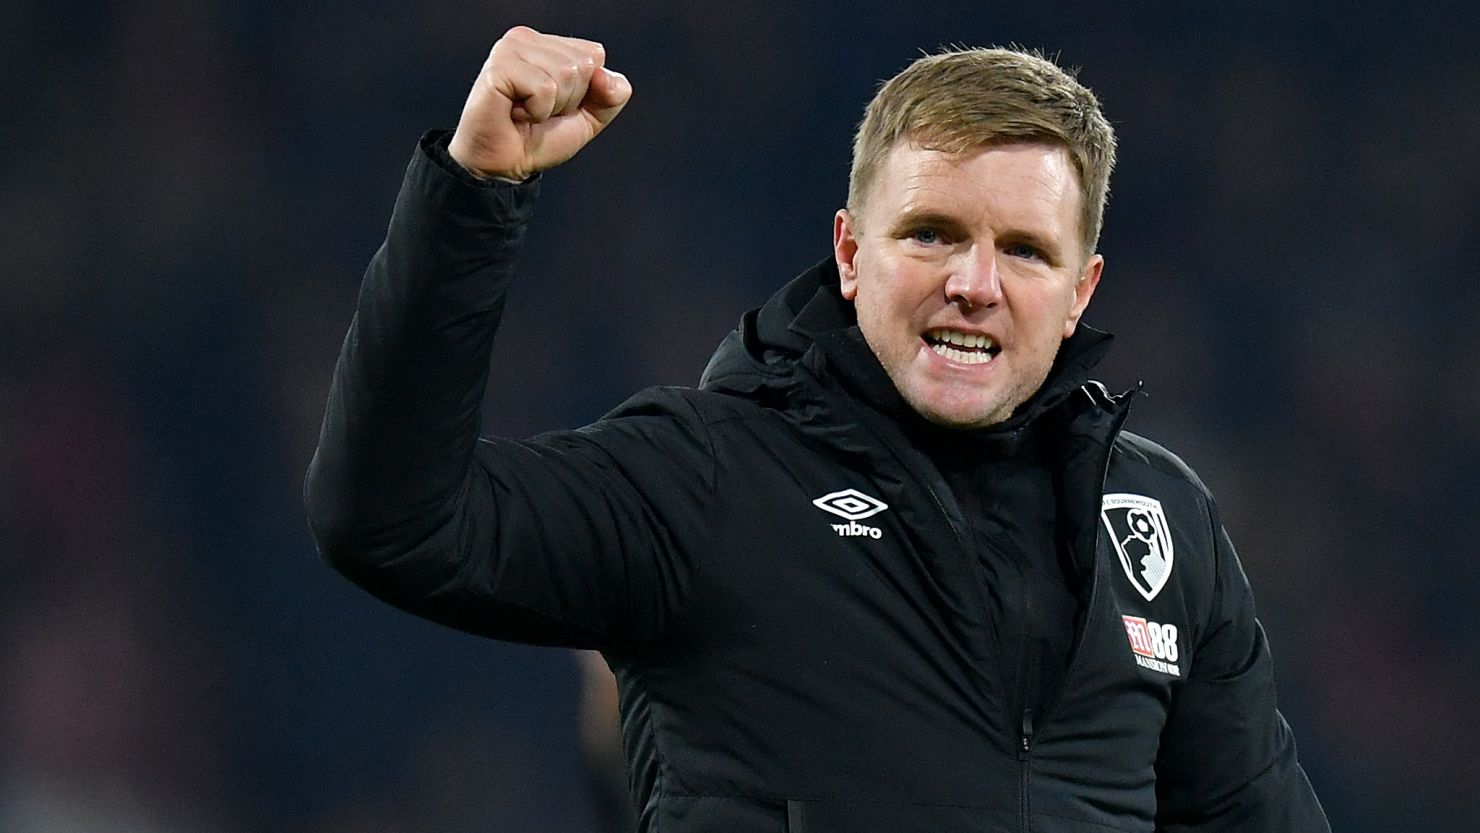 Eddie Howe, former Bournemouth manager, has been announced as Newcastle's new Head Coach.